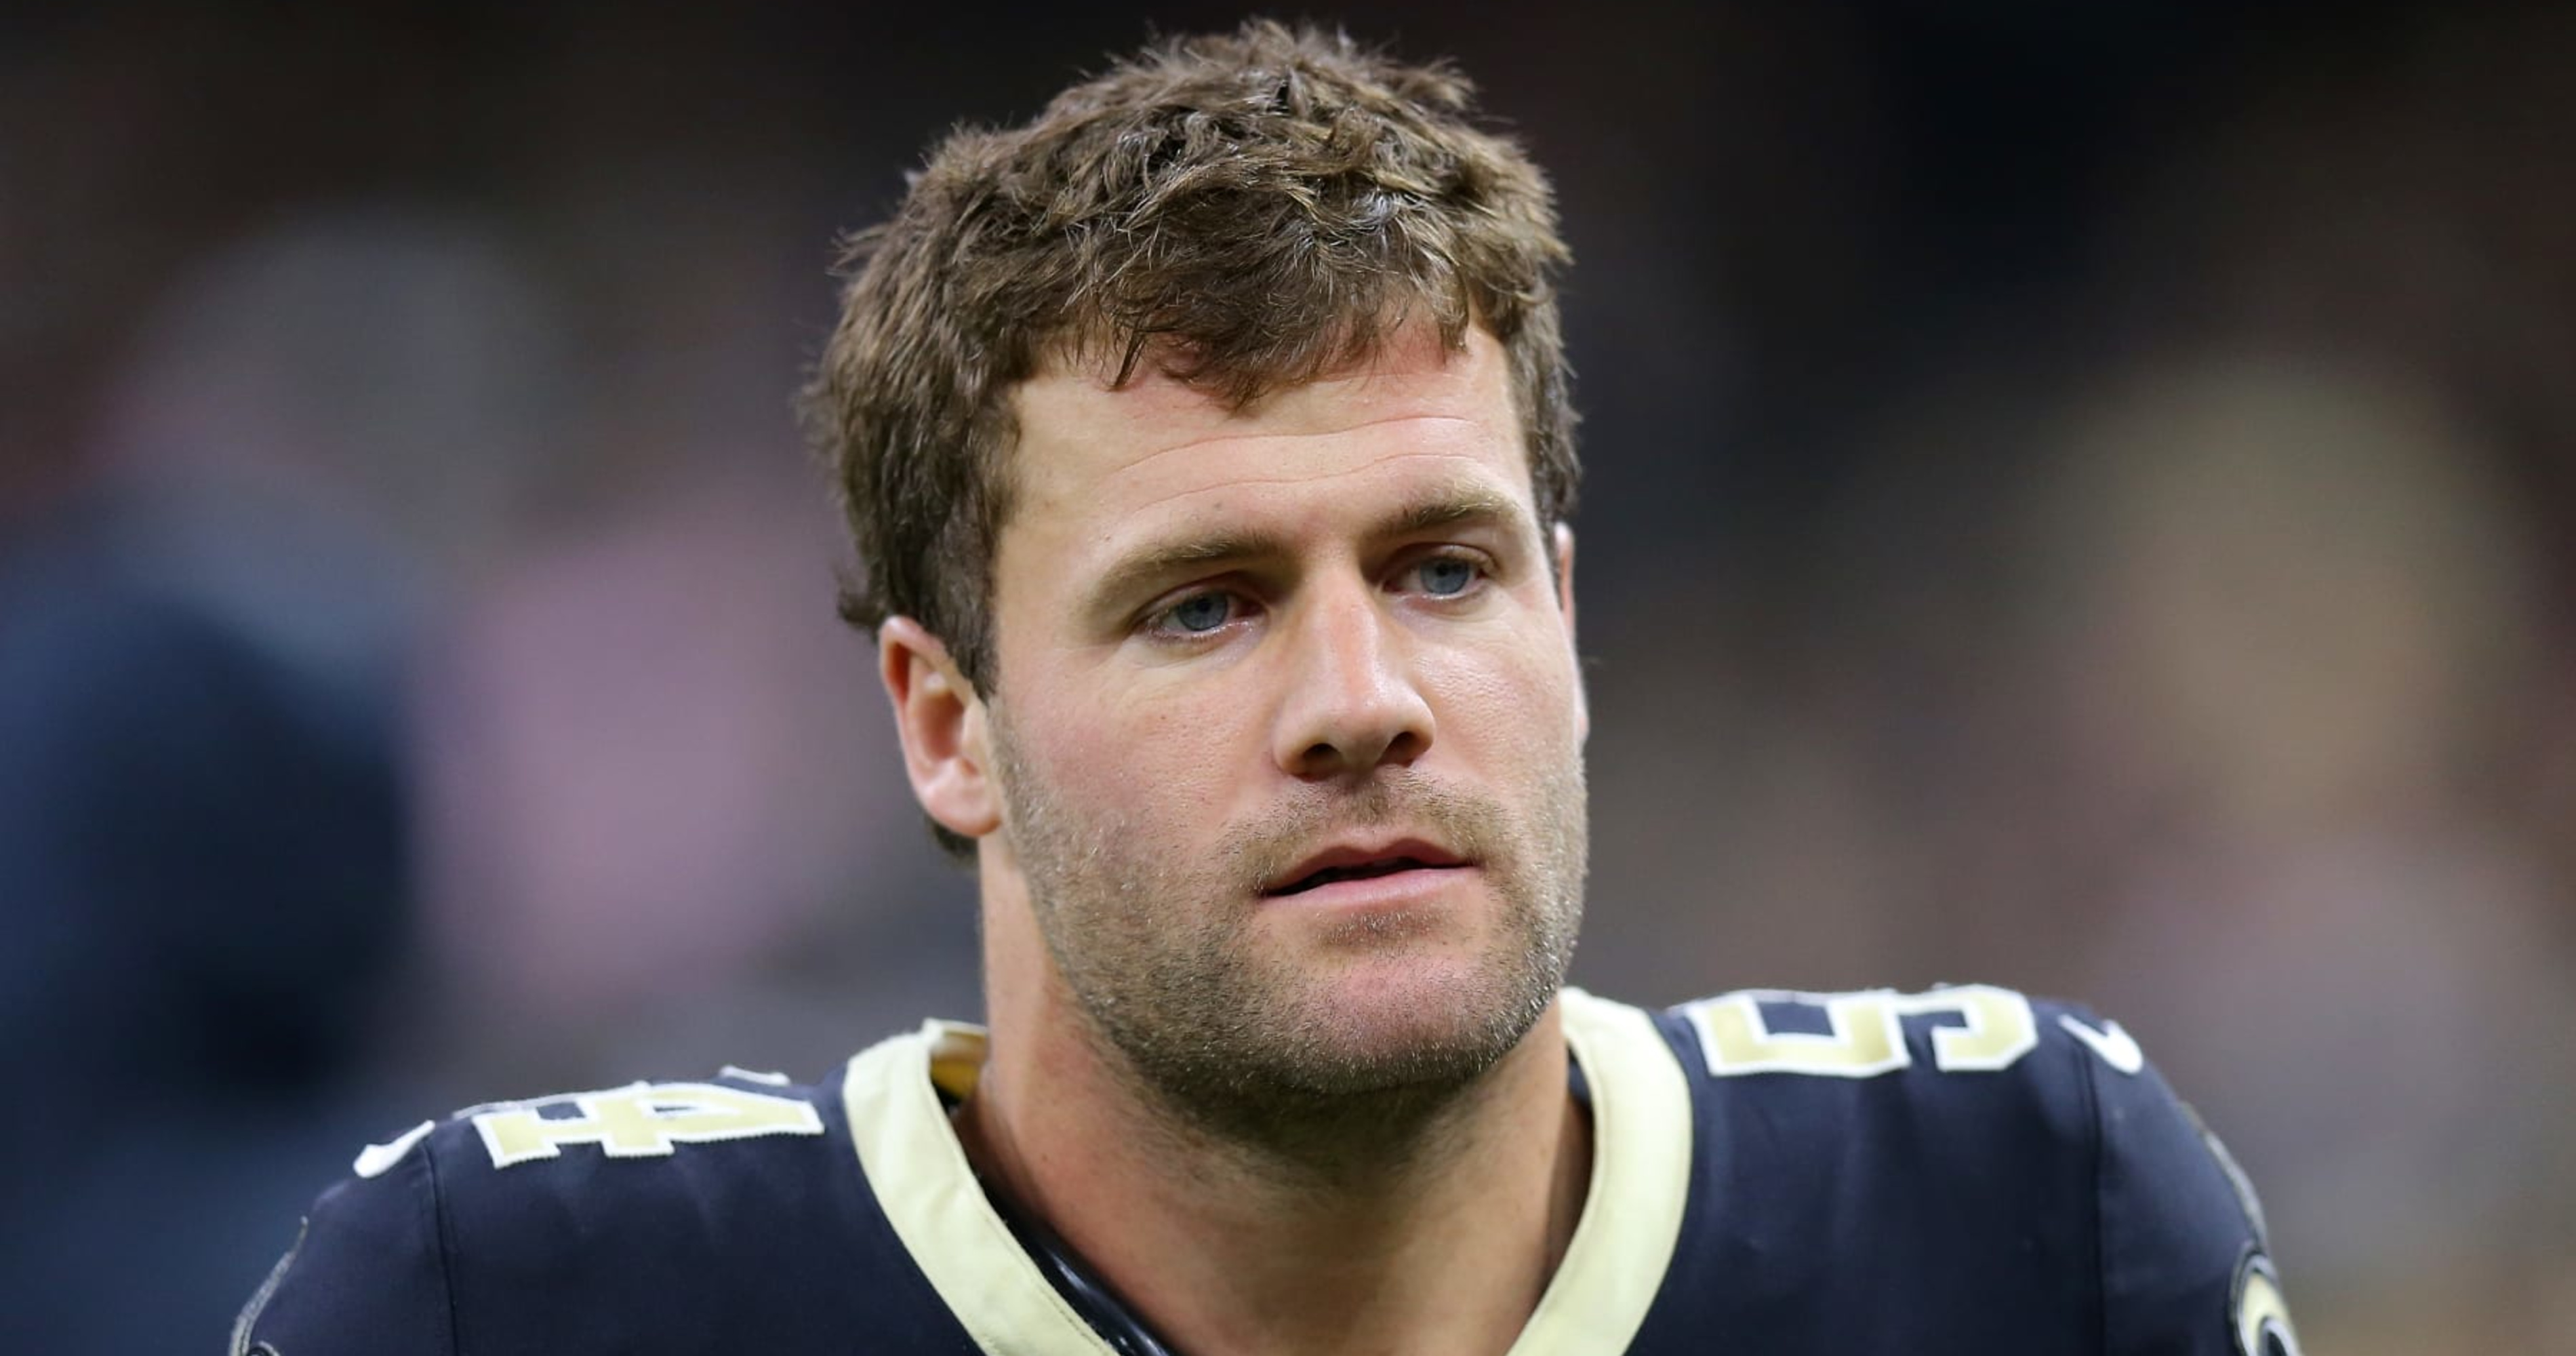 Kiko Alonso Reportedly Retires From NFL 1 Day After Signing Saints Contract